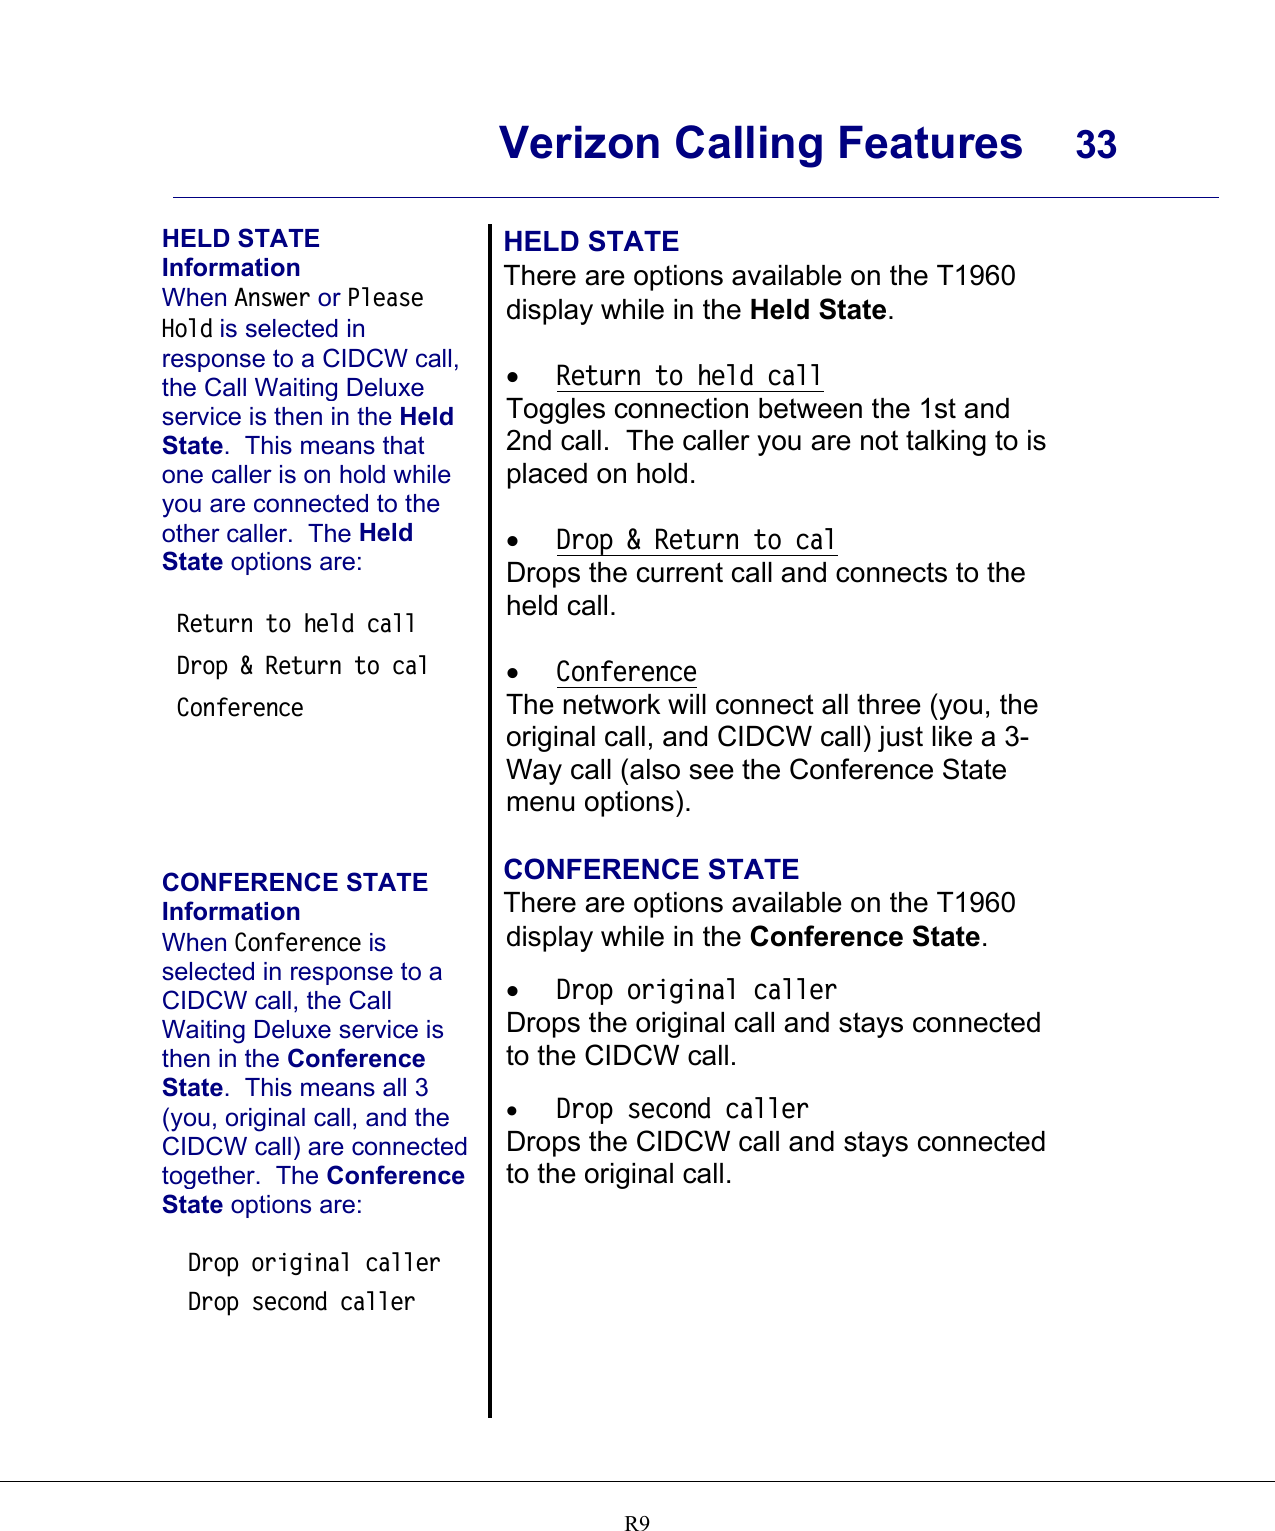      Verizon Calling Features  33    R9HELD STATE Information When Answer or Please Hold is selected in response to a CIDCW call, the Call Waiting Deluxe service is then in the Held State.  This means that one caller is on hold while you are connected to the other caller.  The Held State options are:  Return to held call Drop &amp; Return to cal Conference      CONFERENCE STATE Information When Conference is selected in response to a CIDCW call, the Call Waiting Deluxe service is then in the Conference State.  This means all 3 (you, original call, and the CIDCW call) are connected together.  The Conference State options are:  Drop original caller Drop second caller   HELD STATE There are options available on the T1960 display while in the Held State.  •  Return to held call Toggles connection between the 1st and 2nd call.  The caller you are not talking to is placed on hold.  •  Drop &amp; Return to cal Drops the current call and connects to the held call.  •  Conference The network will connect all three (you, the original call, and CIDCW call) just like a 3-Way call (also see the Conference State menu options).  CONFERENCE STATE There are options available on the T1960 display while in the Conference State.  •  Drop original caller Drops the original call and stays connected to the CIDCW call.  •  Drop second caller Drops the CIDCW call and stays connected to the original call.  